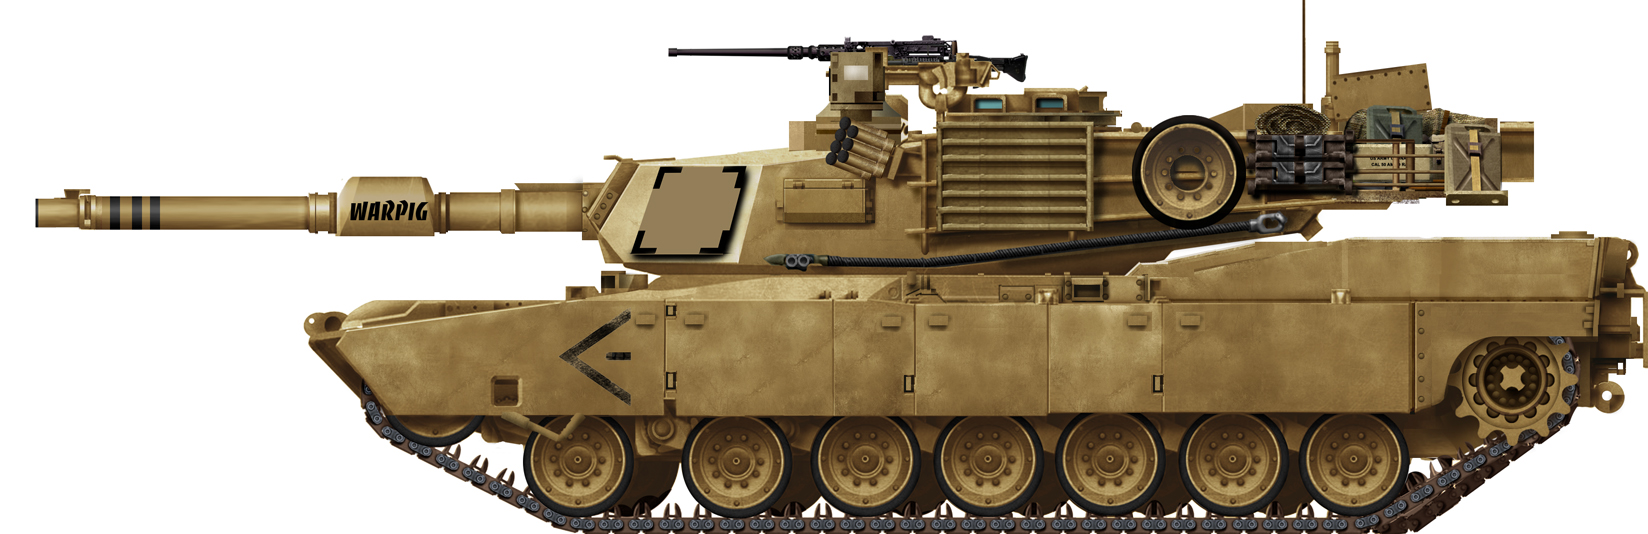 Image about US Approves $1.2 Billion Upgrade for Morocco’s M1A1 Abrams Tanks